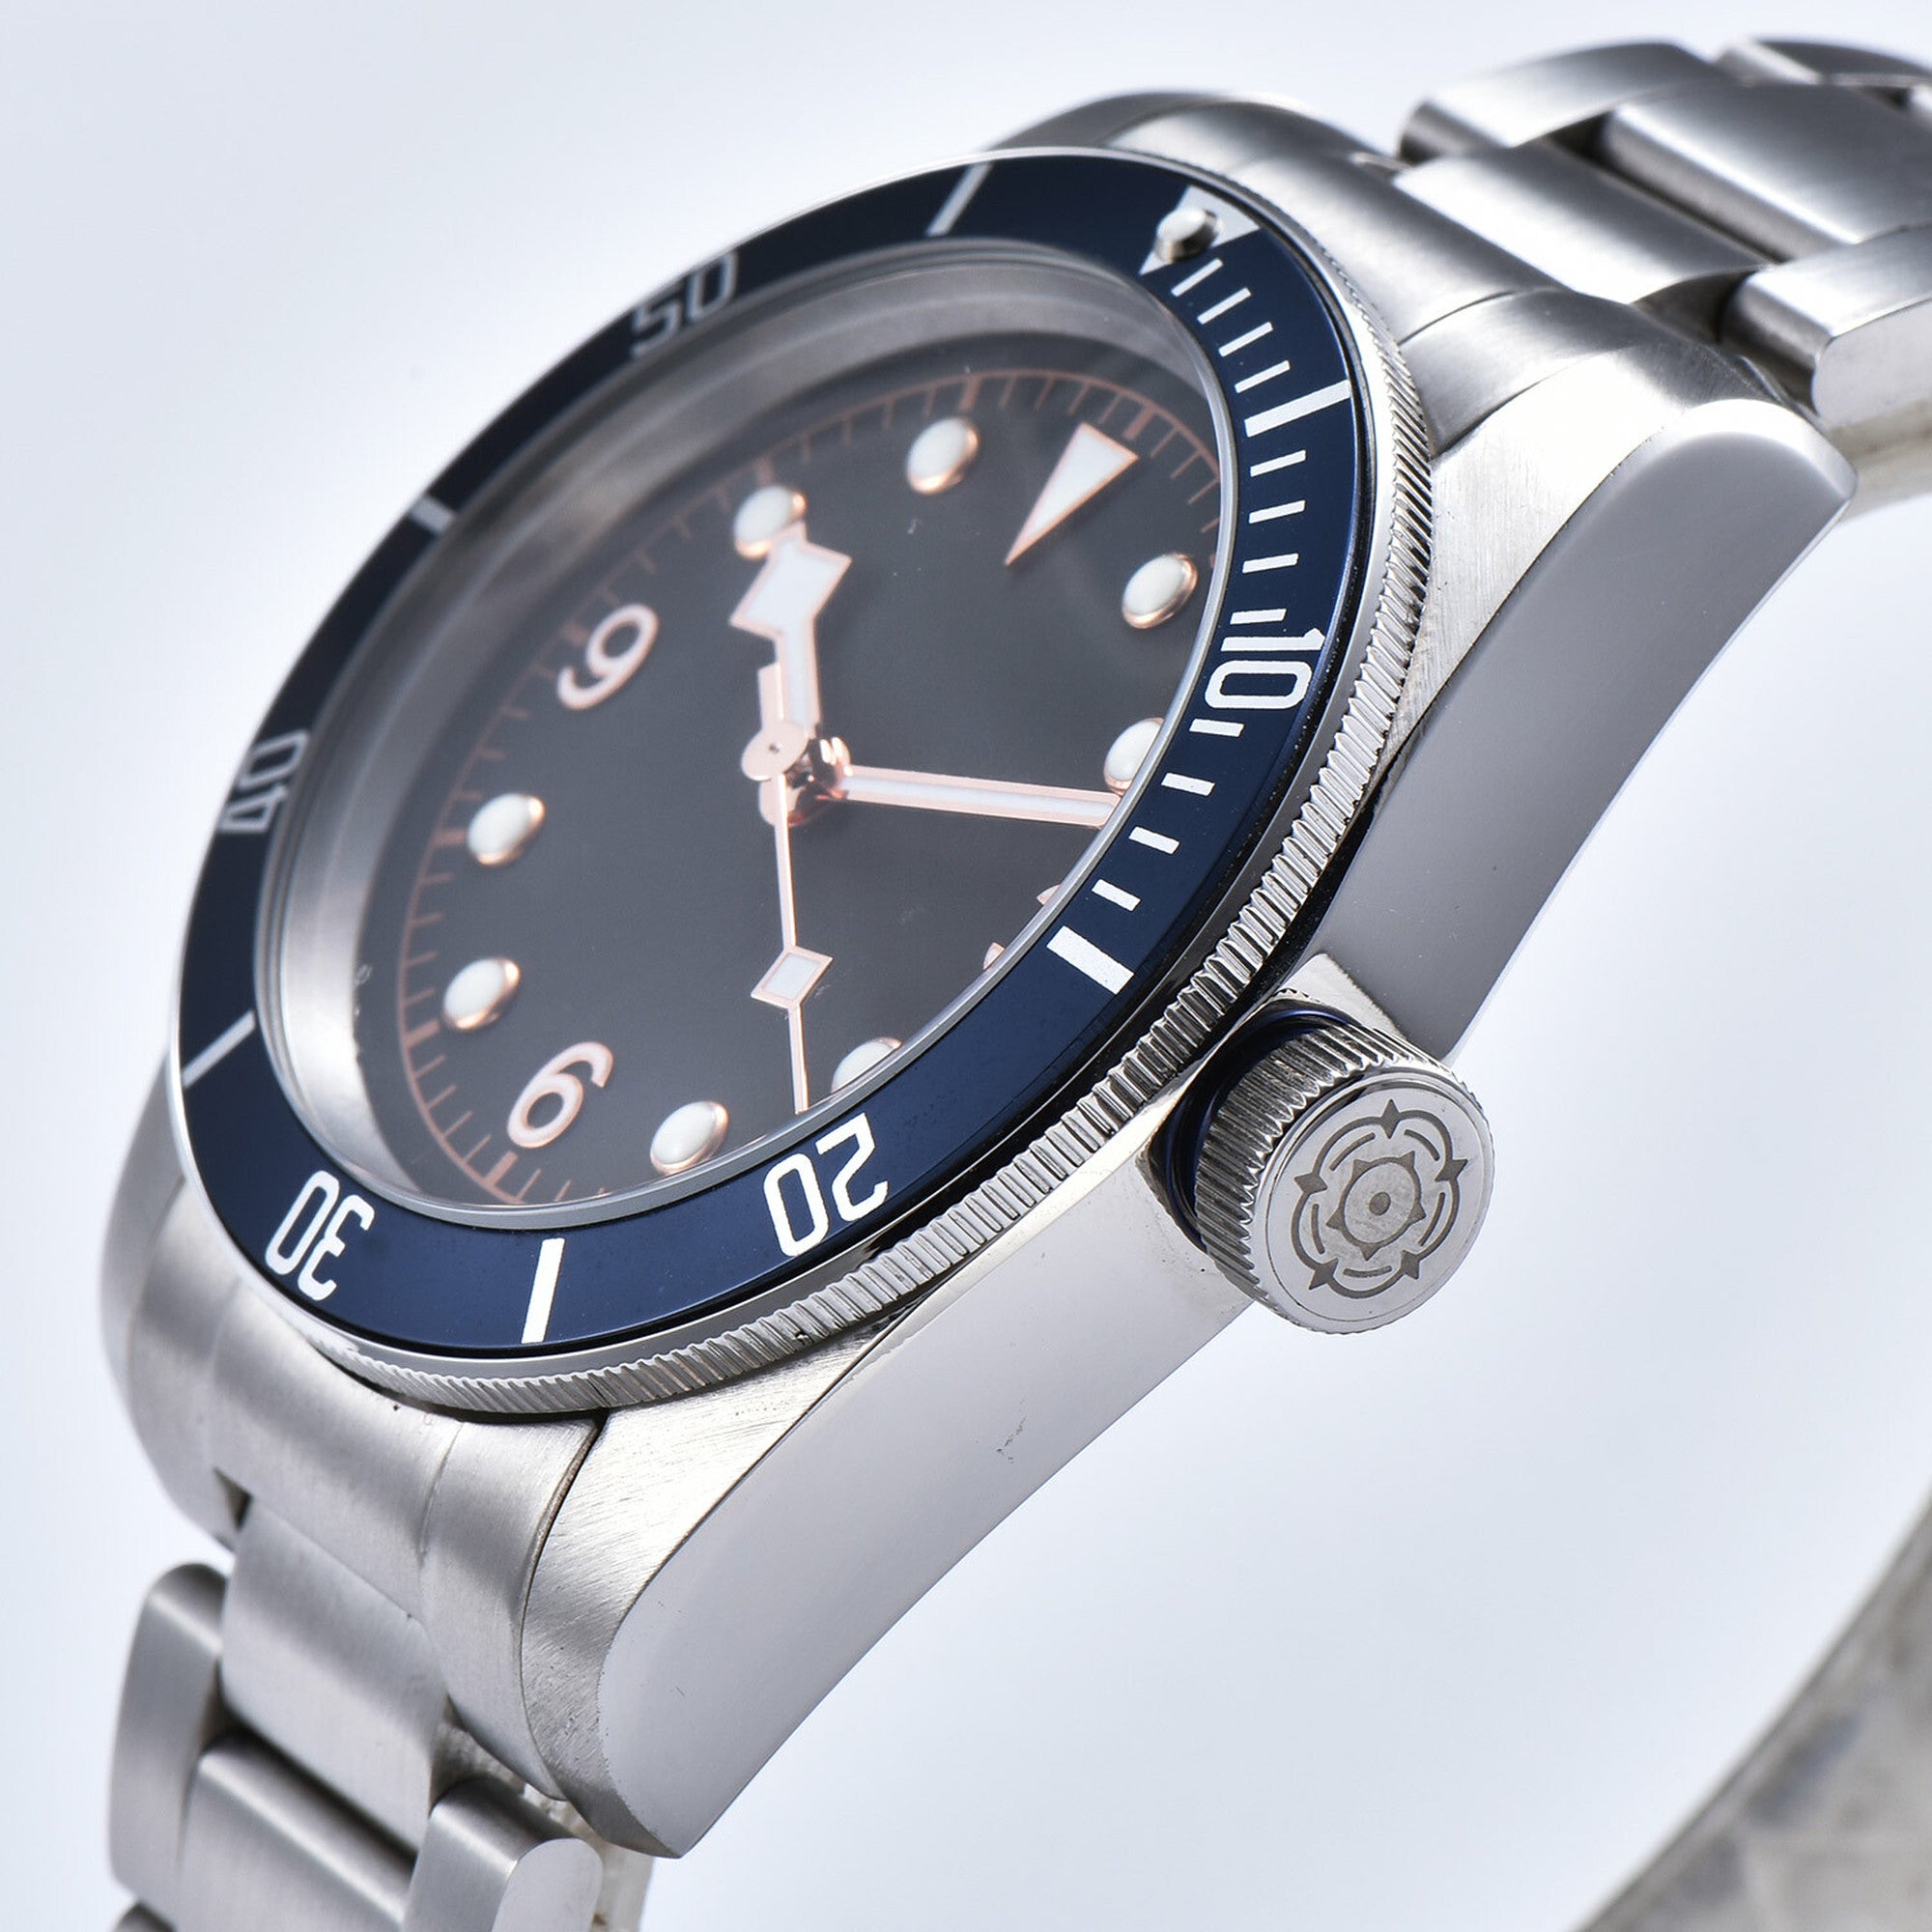 Men's Mechanical Self-Winding Black Bay Watches / Navy, Gold / Suits, Popular Brands / Fashion B61